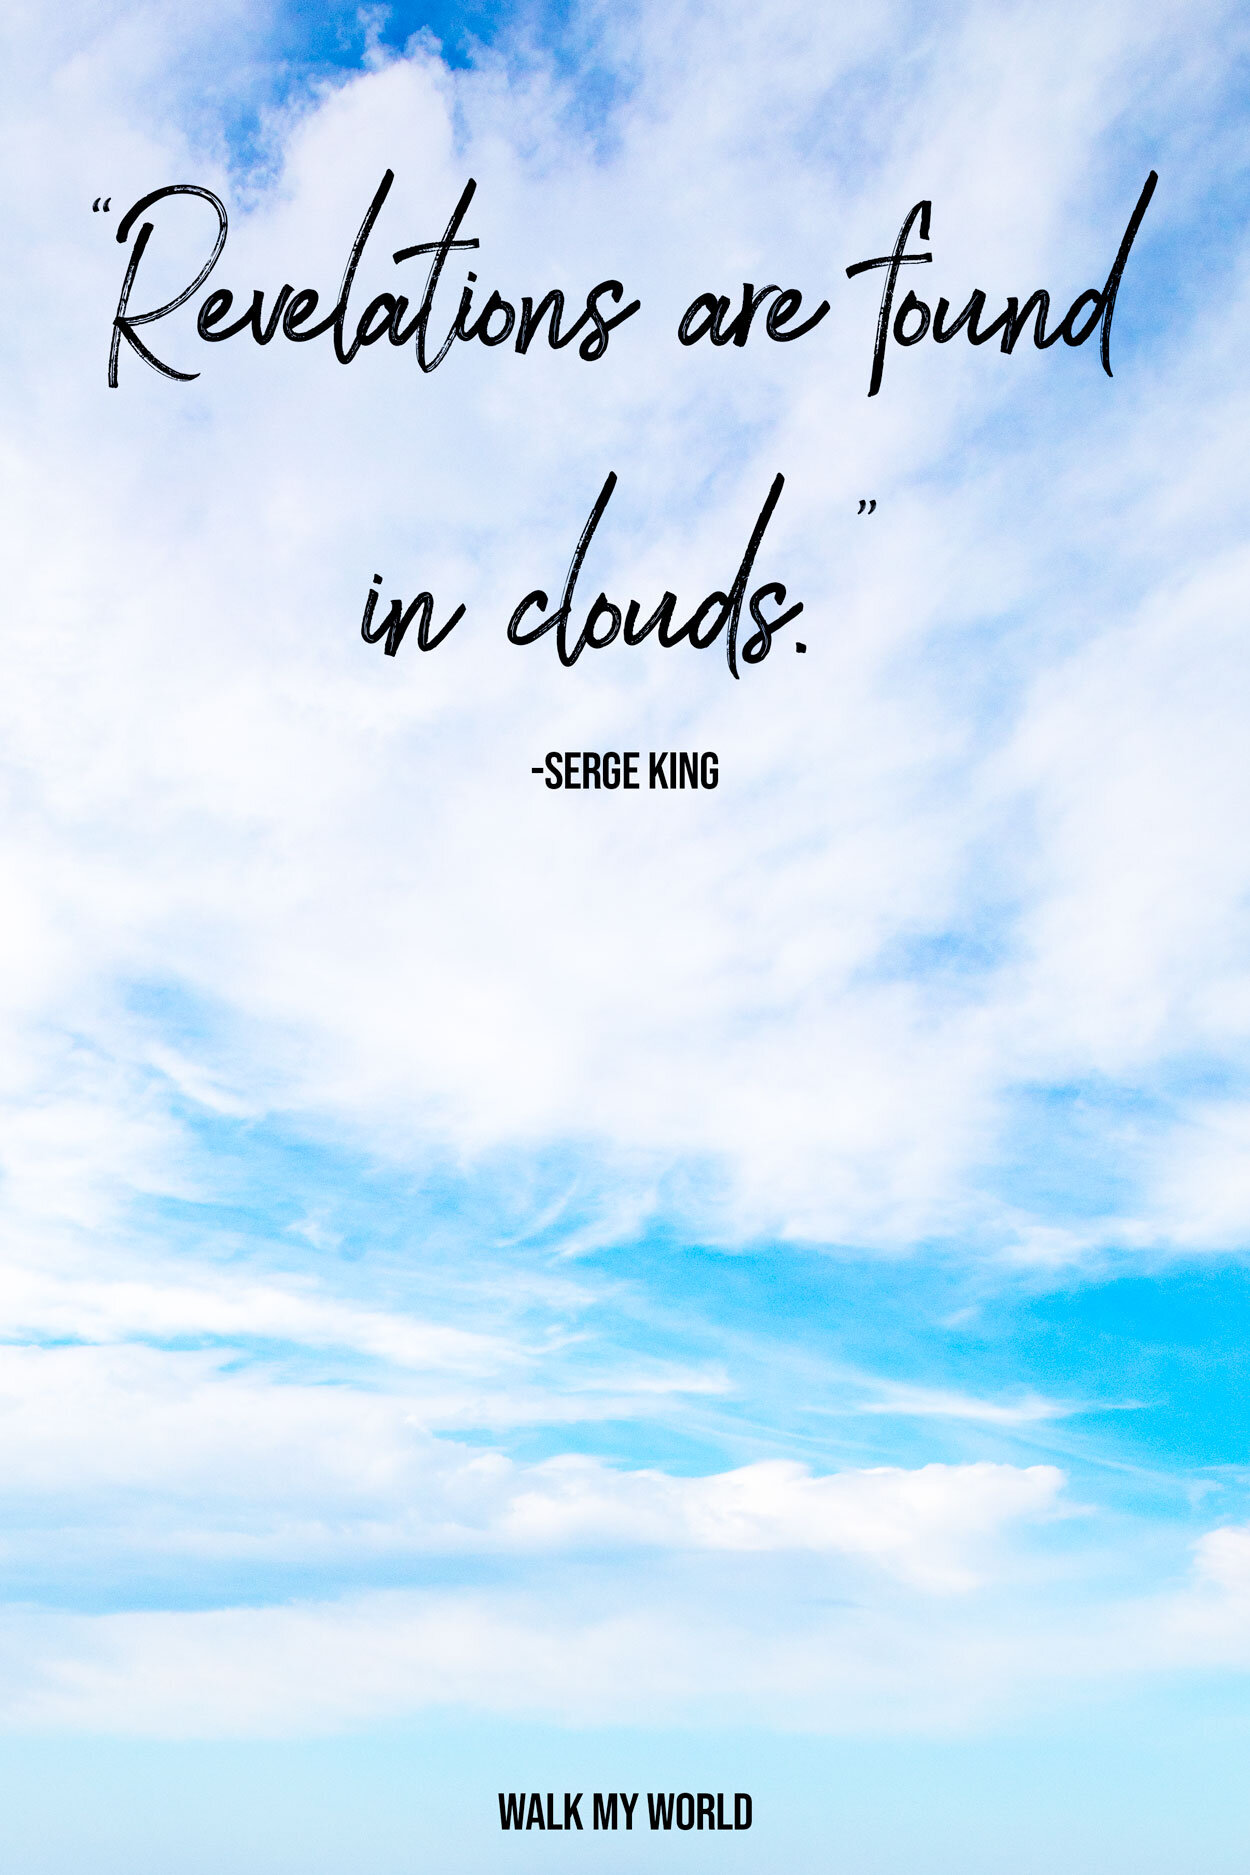 40 Inspirational Cloud Quotes to brighten your day — Walk My World